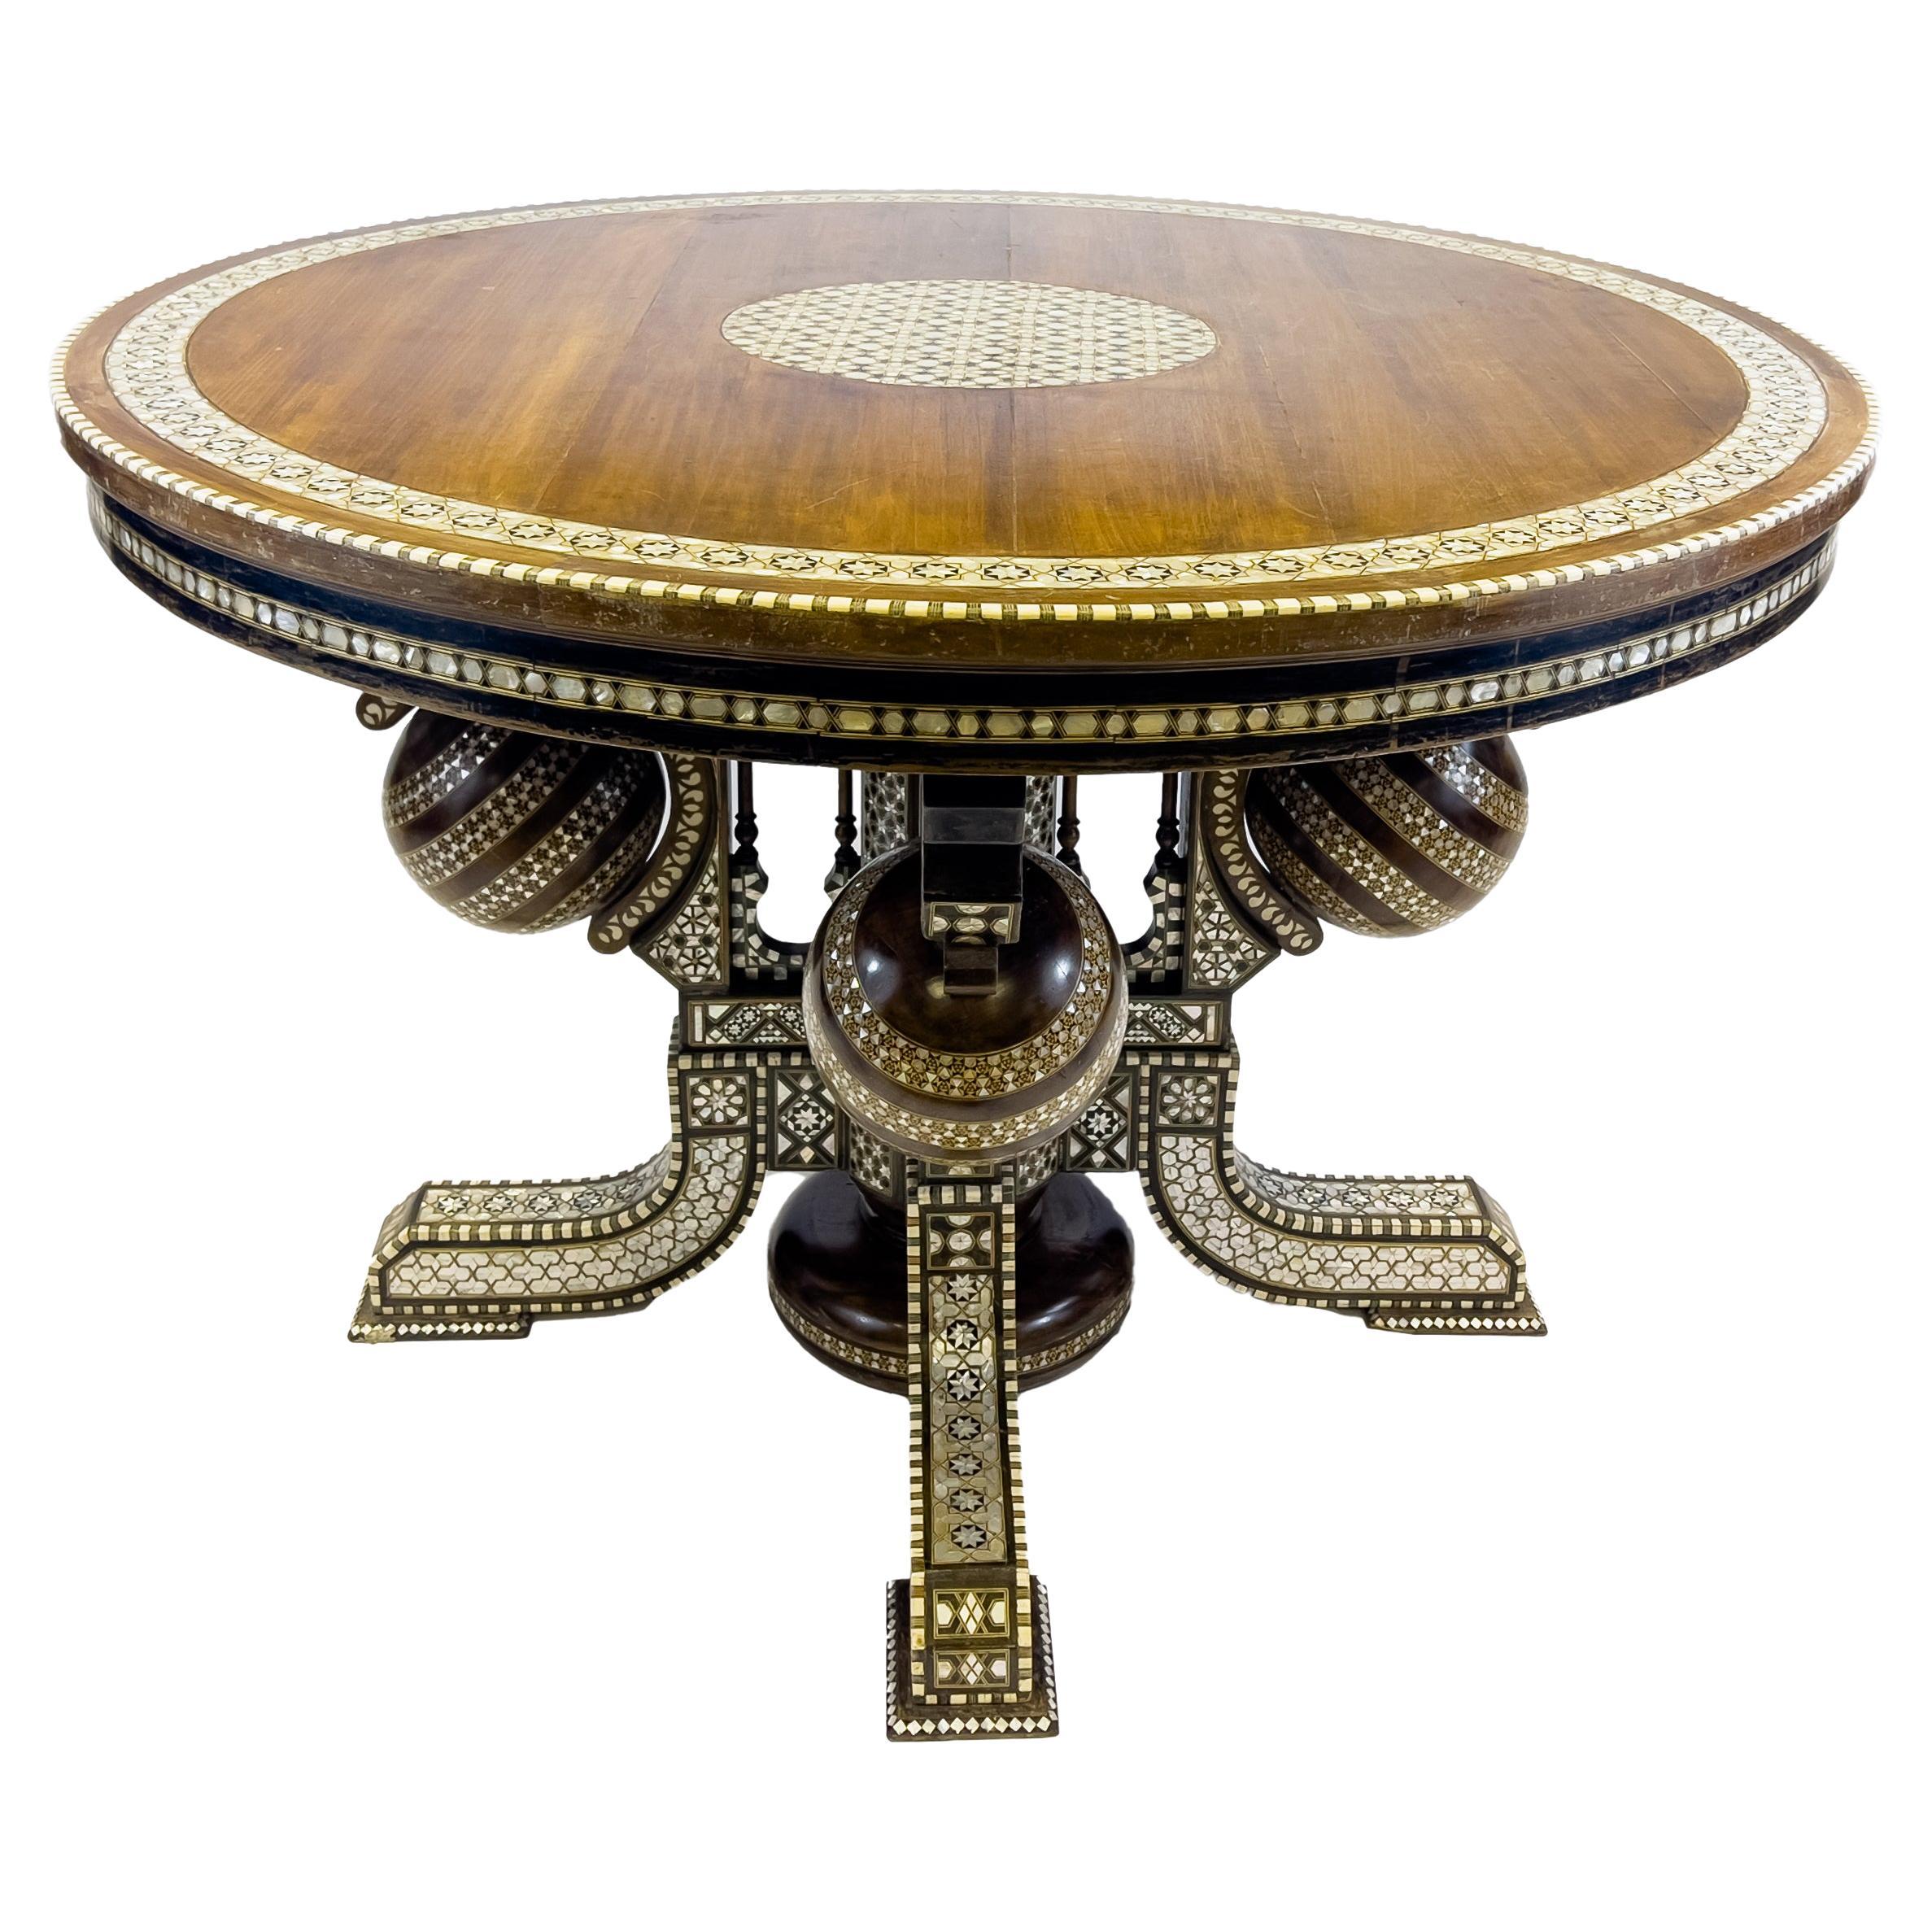 Alberto Pinto Style Mother of Pearl and Bone Inlaid Round Centre/Dining Table 